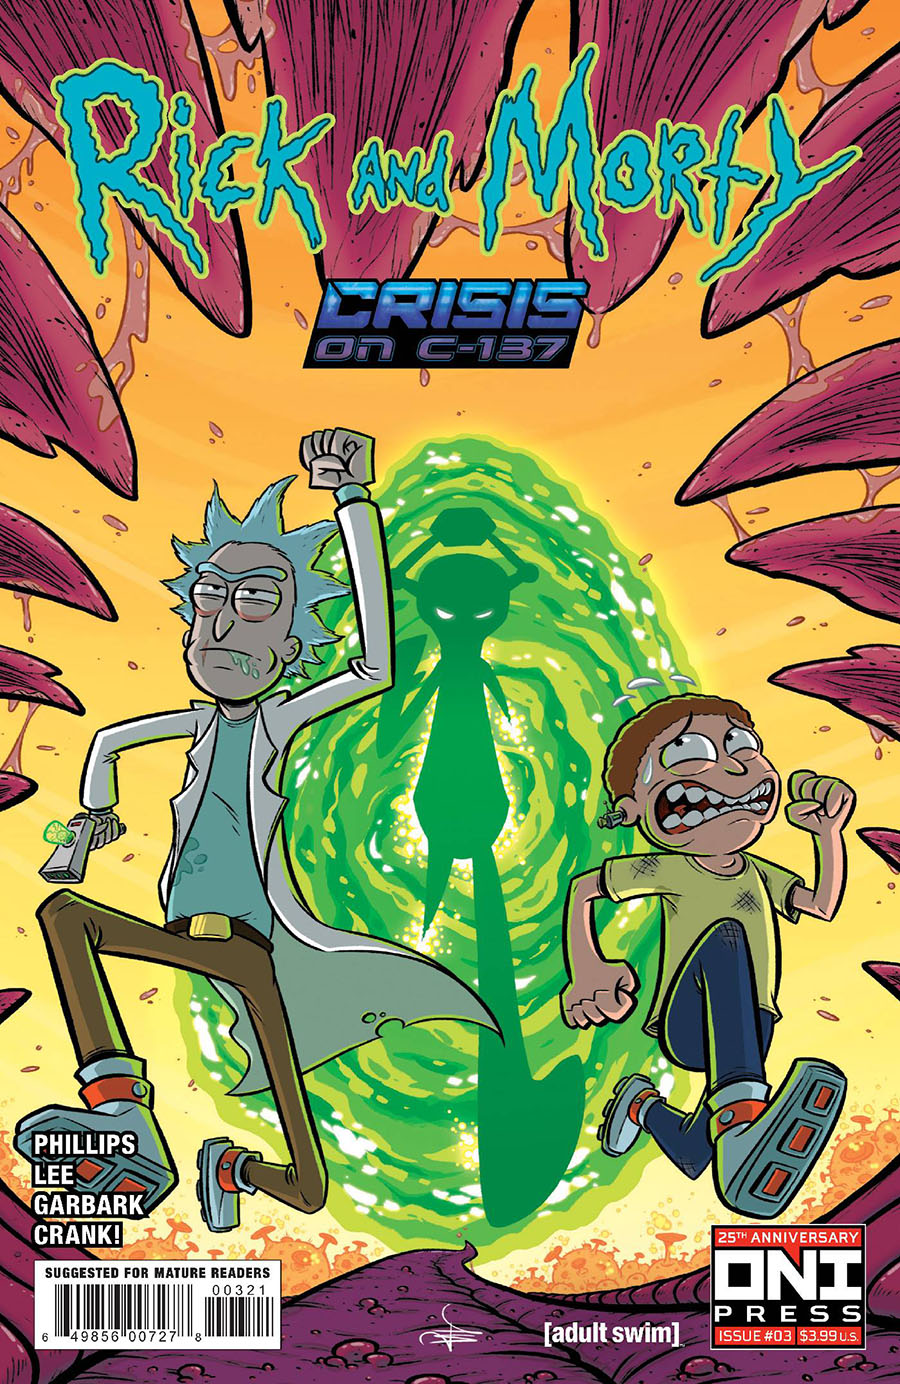 Rick And Morty Crisis On C-137 #3 Cover B Variant Julien Pare-Sorel Cover